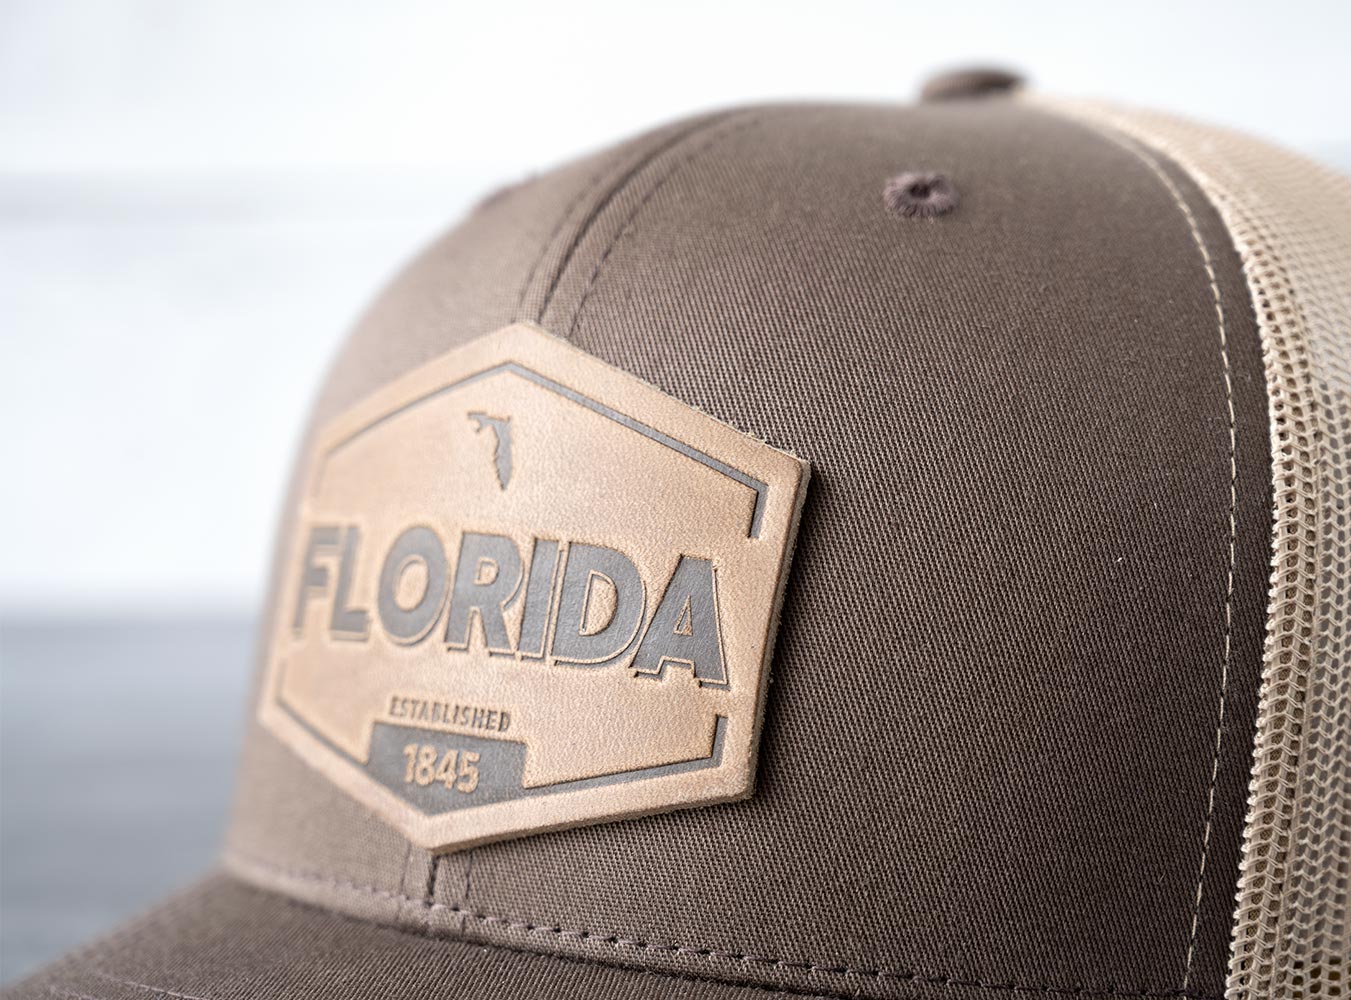 Closeup View of the RANGE Leather Florida Established Hat in Brown & Khaki